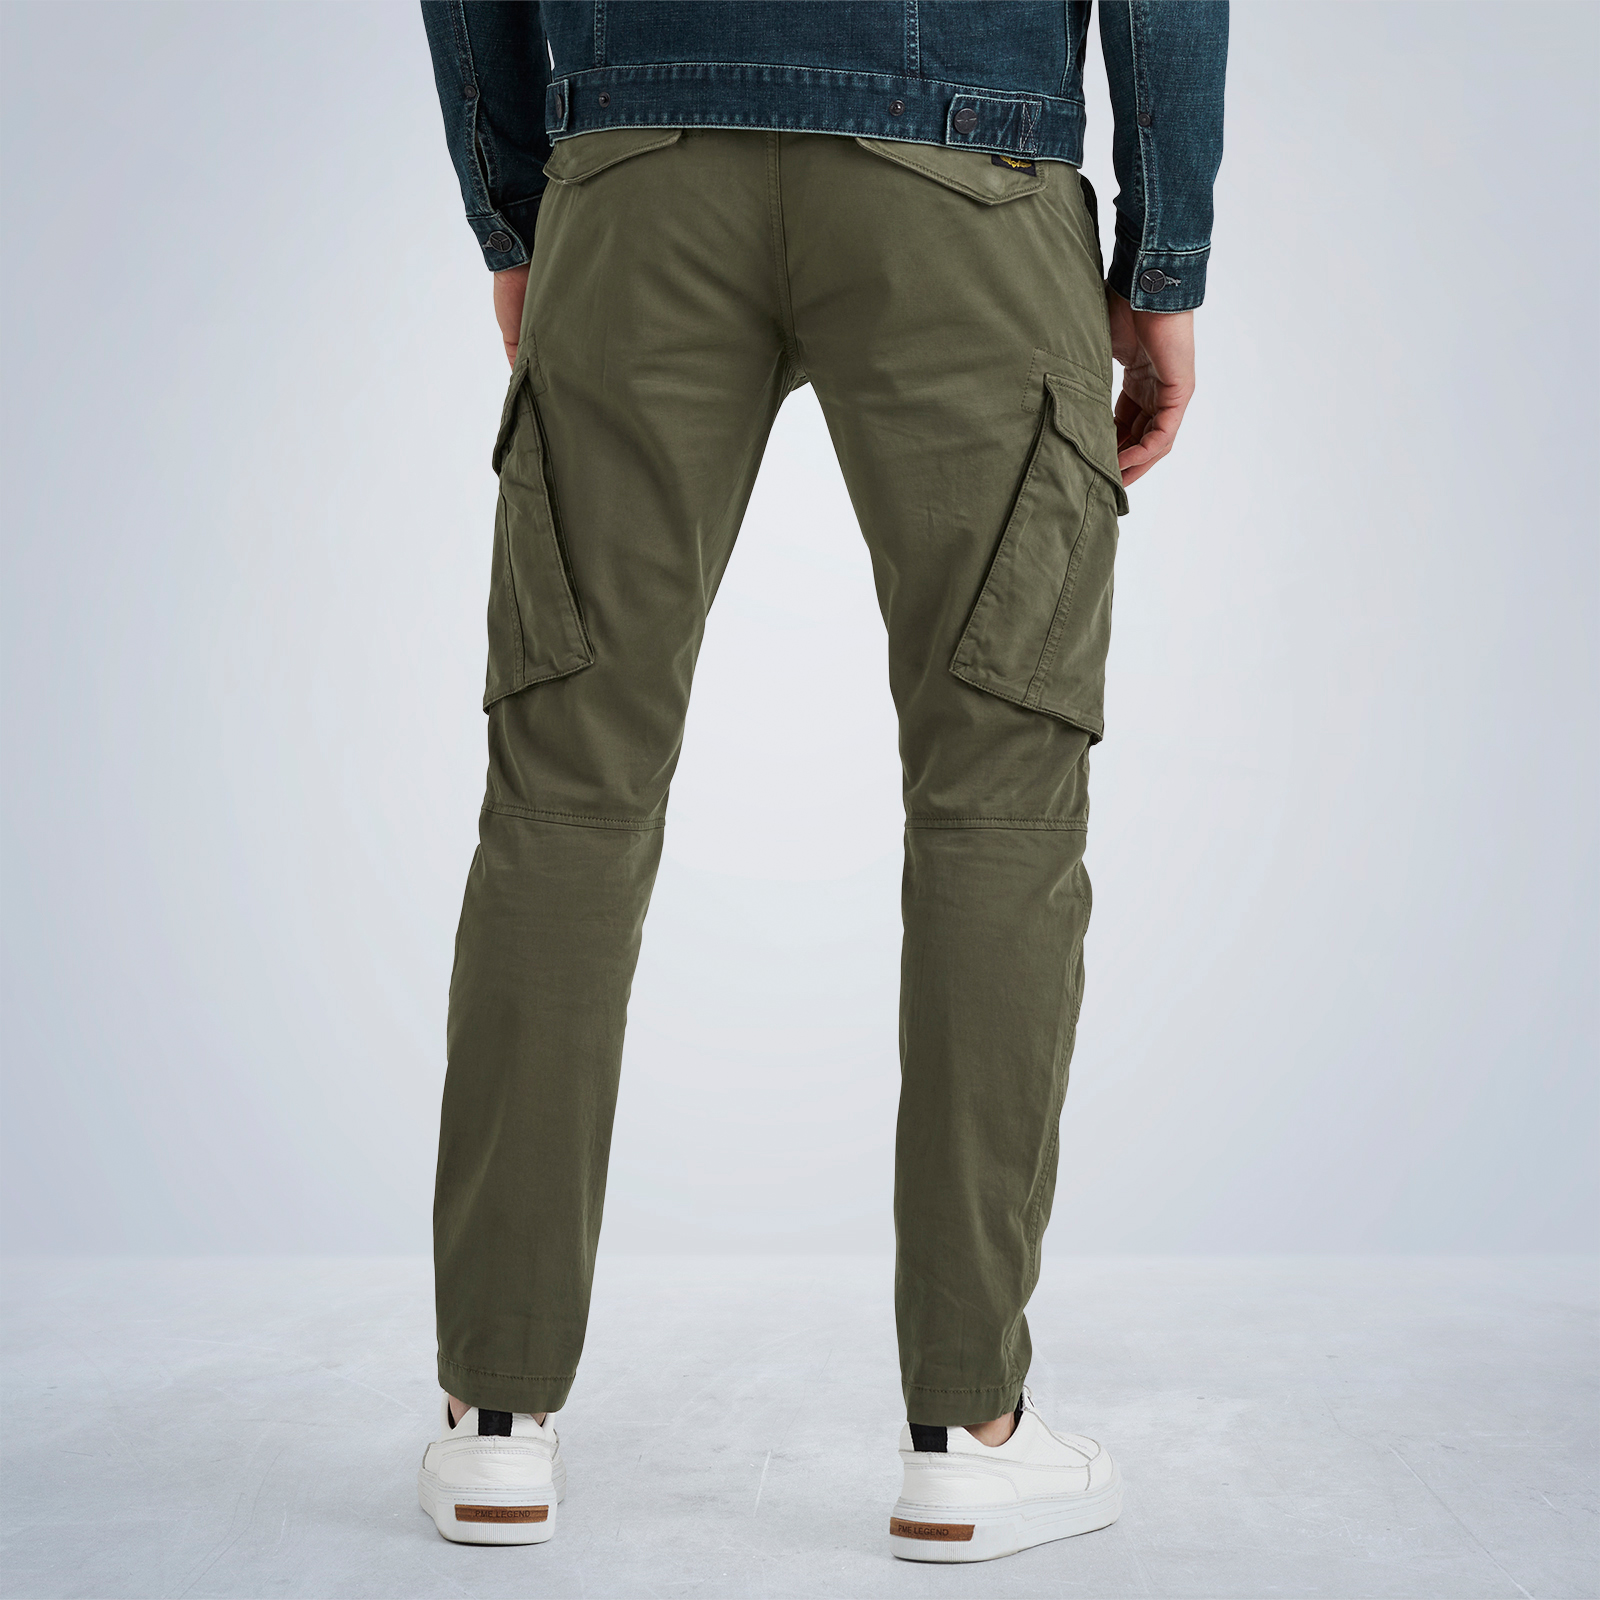 Nordrop tapered fit cargo pants | Free shipping and returns - PME LEGEND